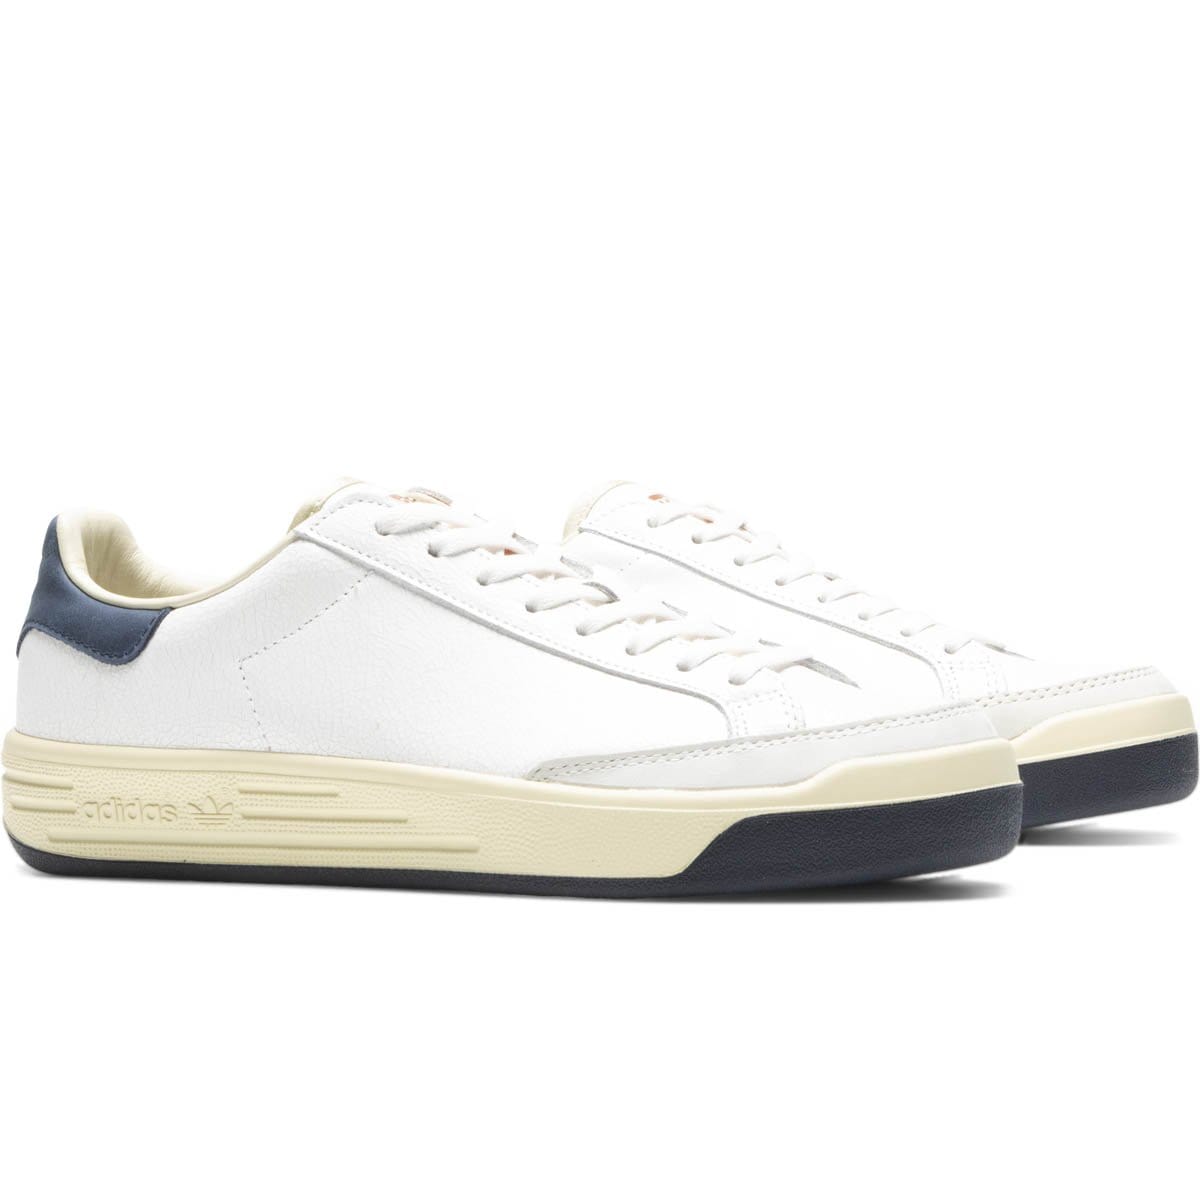 adidas Shoes CONSORTIUM ROD LAVER (Cracked Leather)